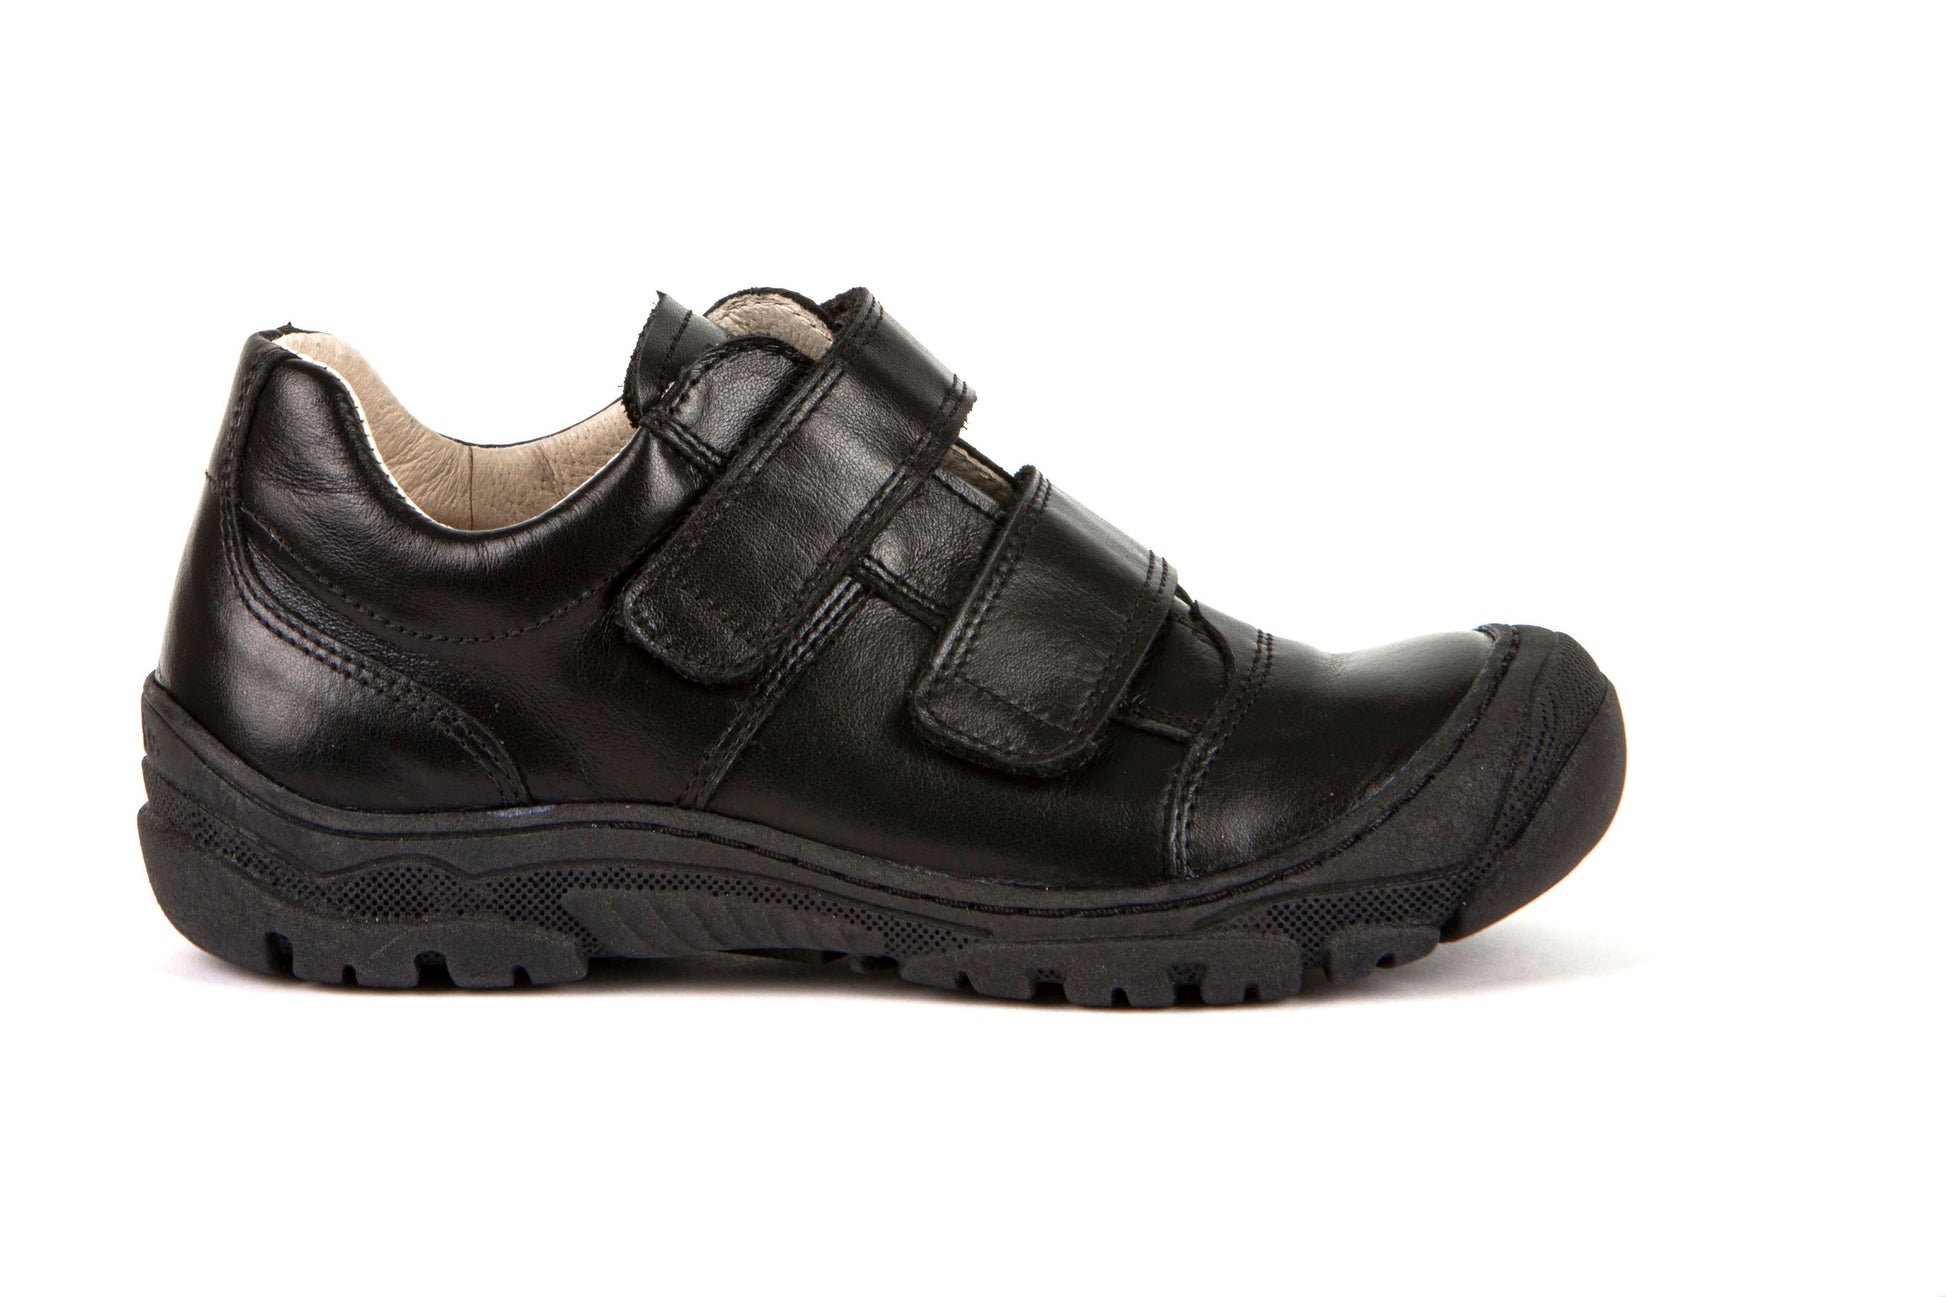 A boys school shoe by Froddo, style G3130188 Leo, in black leather with double velcro fastening. Right side view.